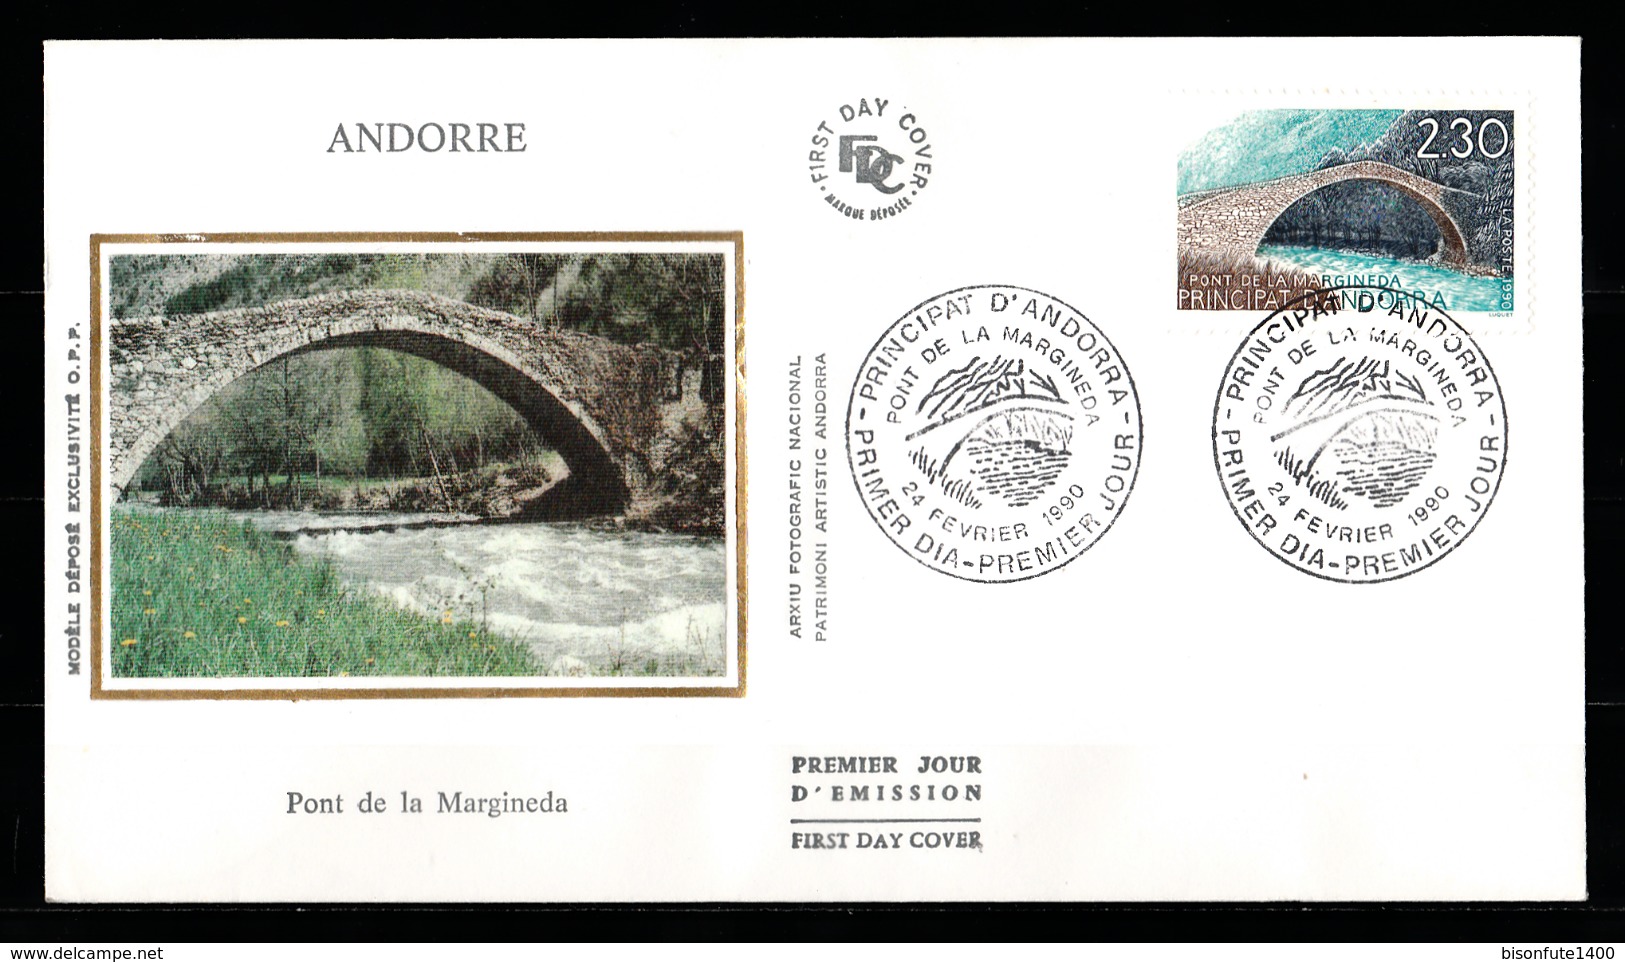 Andorre Français 1990 : Timbres Yvert & Tellier N° 385. - Lettres & Documents